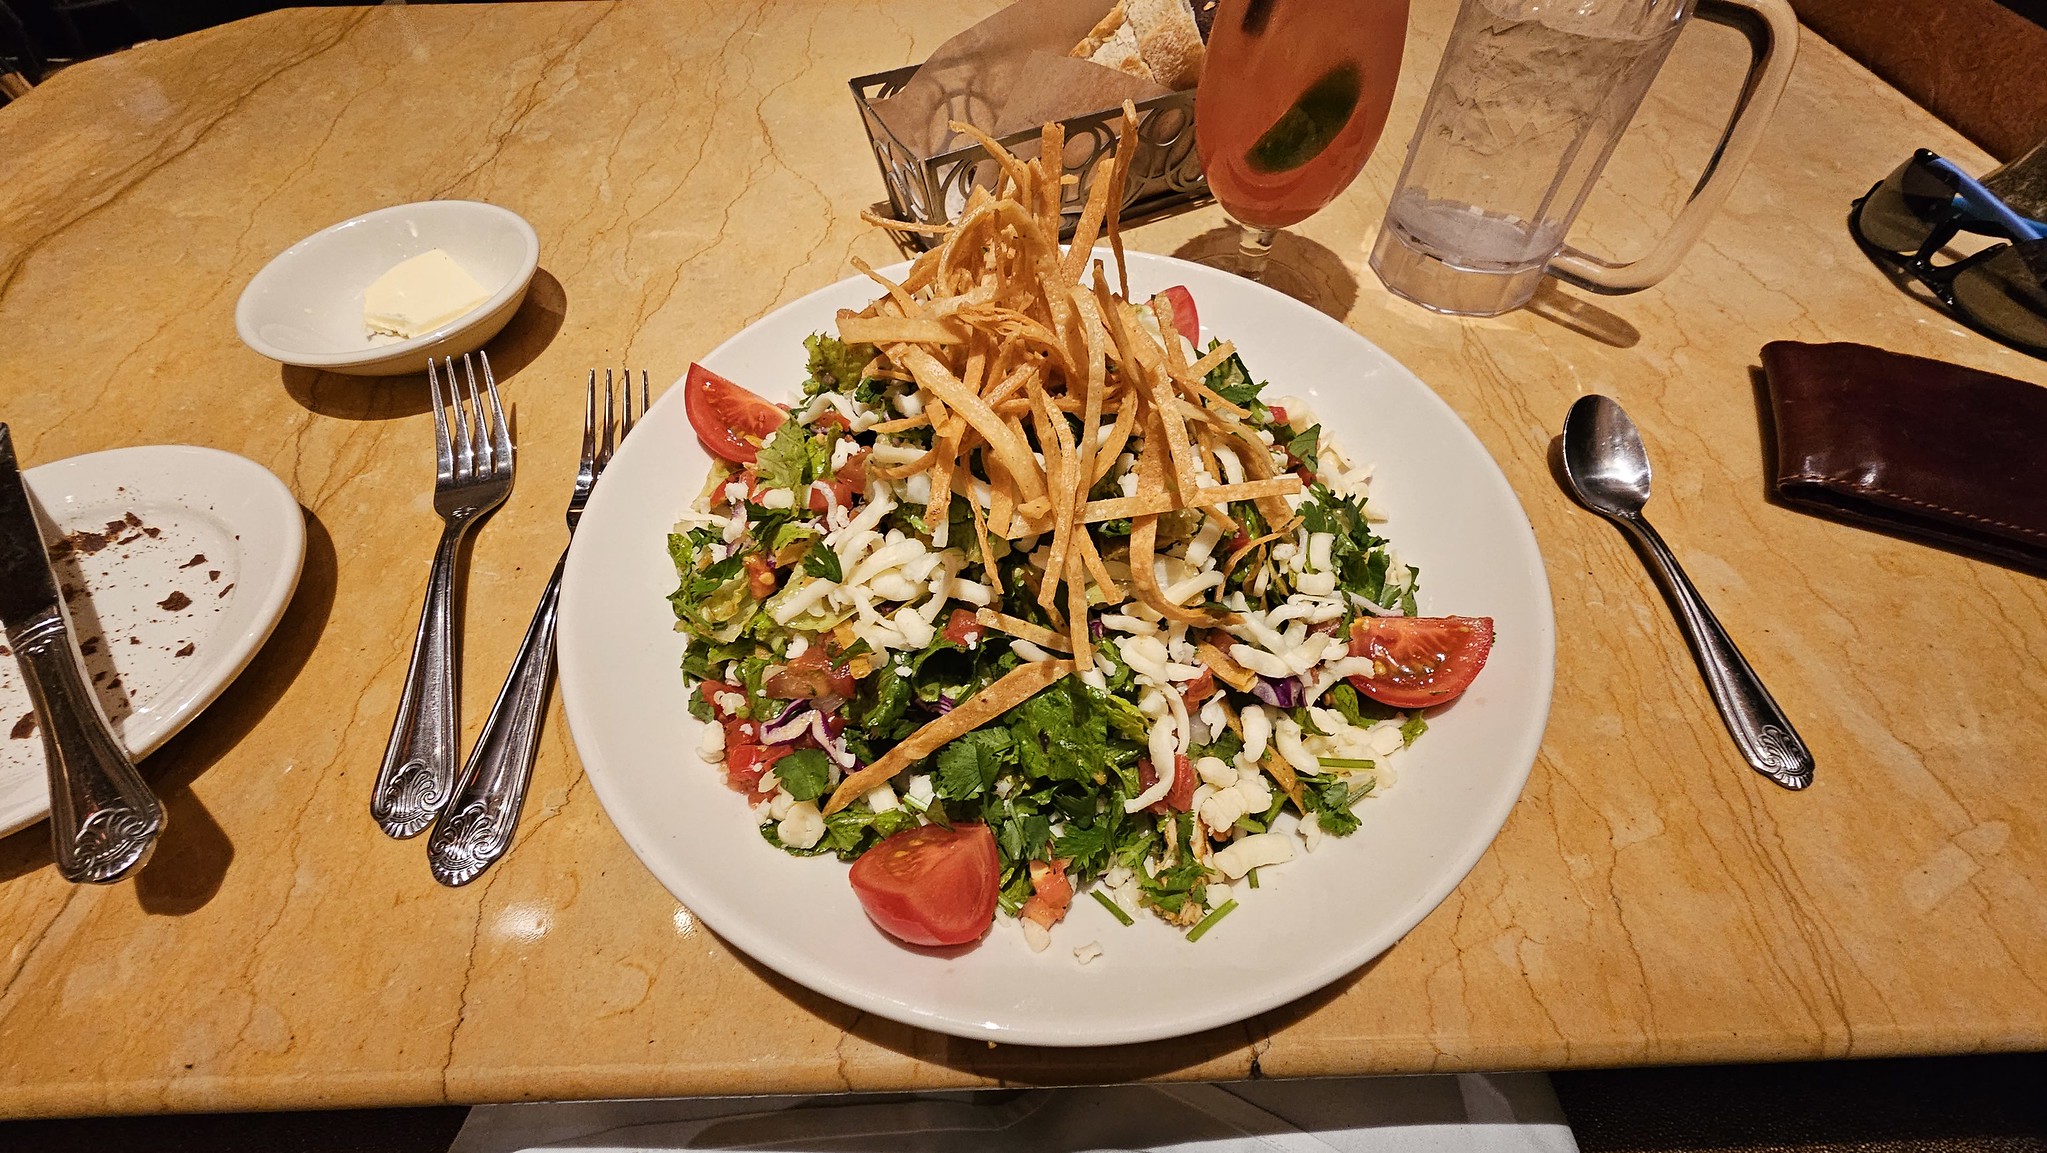 My "small" Sante Fe lunchtime salad enjoyed at TCF in San Jose